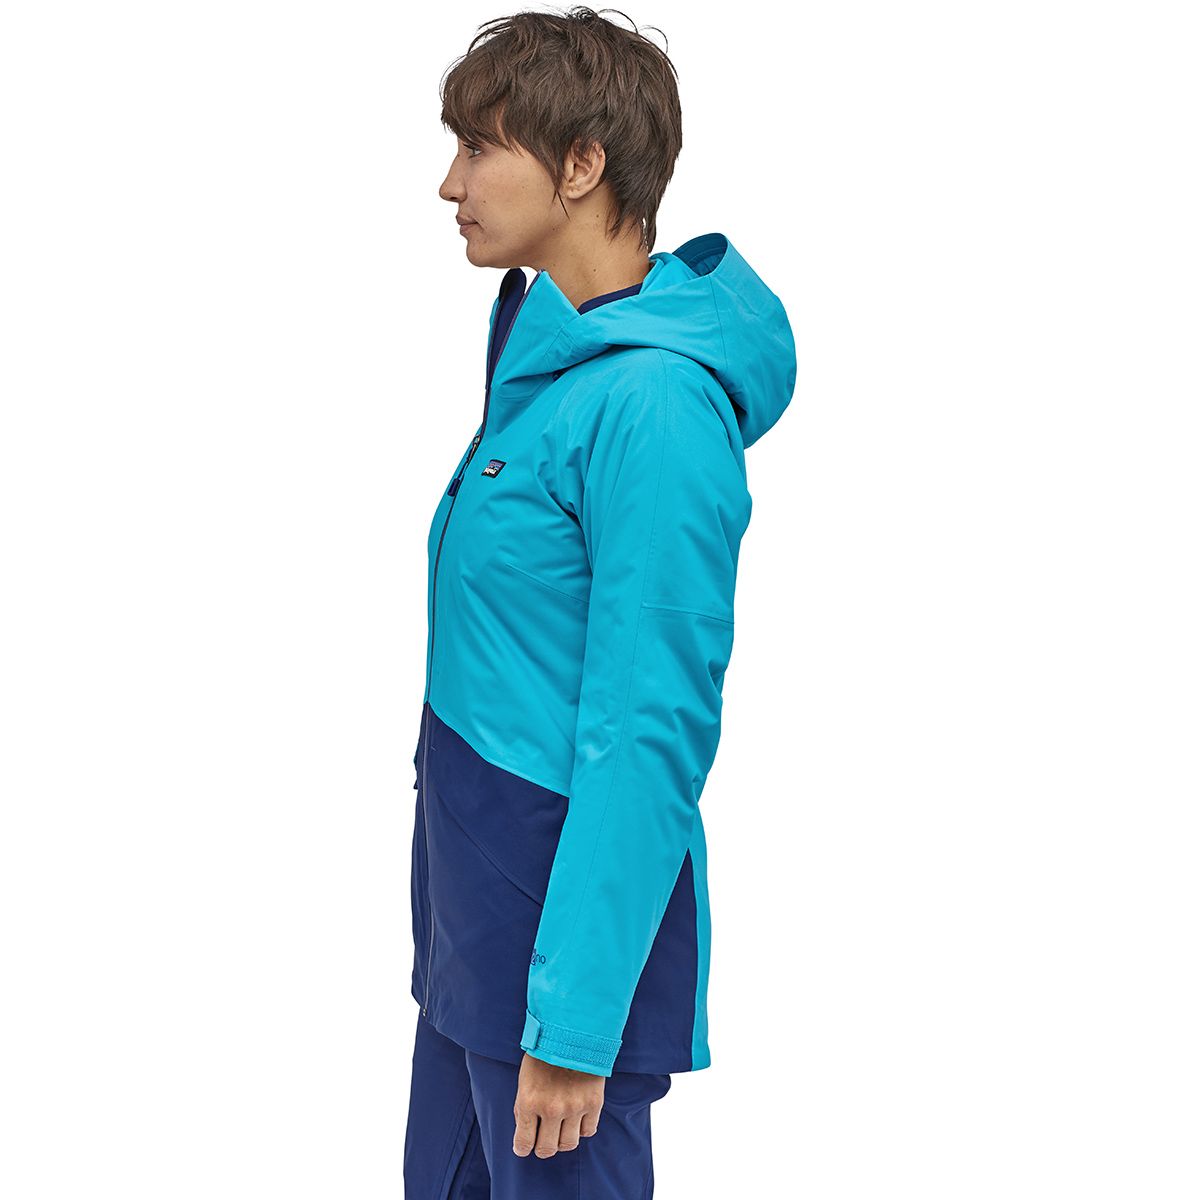 Patagonia Insulated Snowbelle Jacket   Women's   Clothing